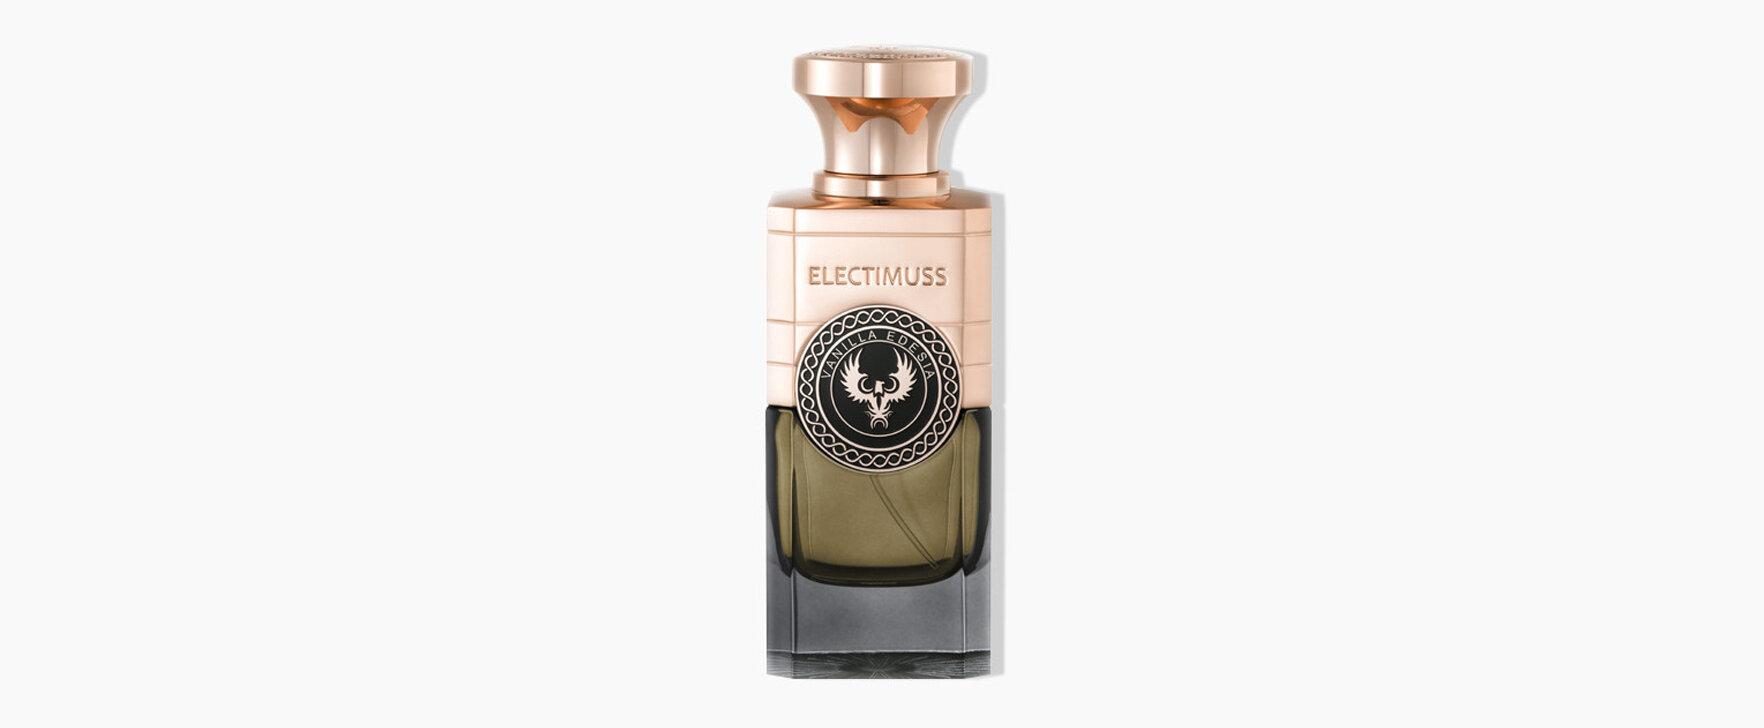 A Fragrance of Opulence and Abundance: "Vanilla Edesia" by Electimuss